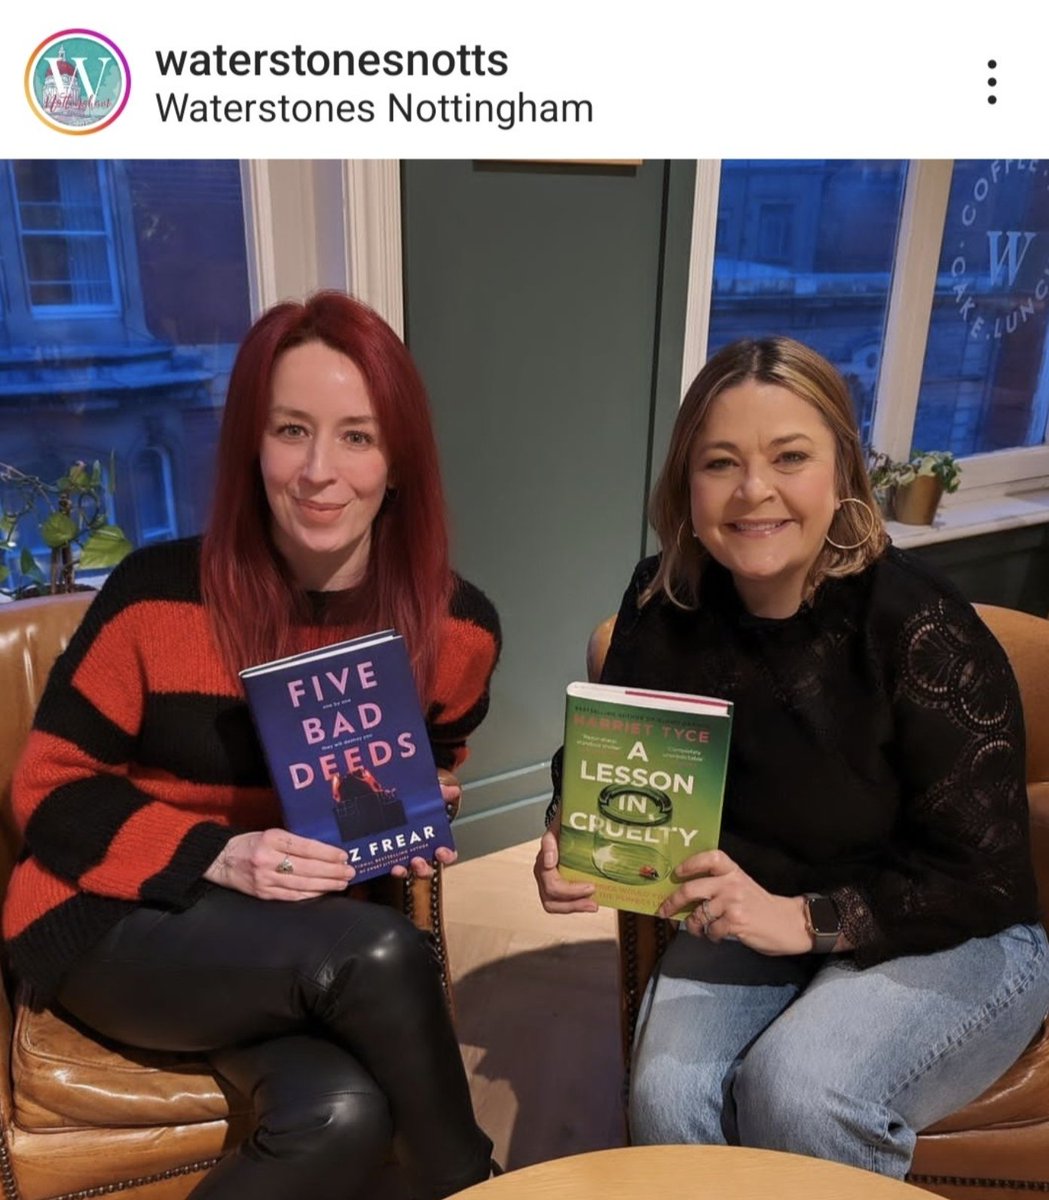 Really lovely event at @WaterstonesNG last night. I think @harriet_tyce and I could have talked all evening! Thanks so much to Kibrina for hosting us ❤️❤️